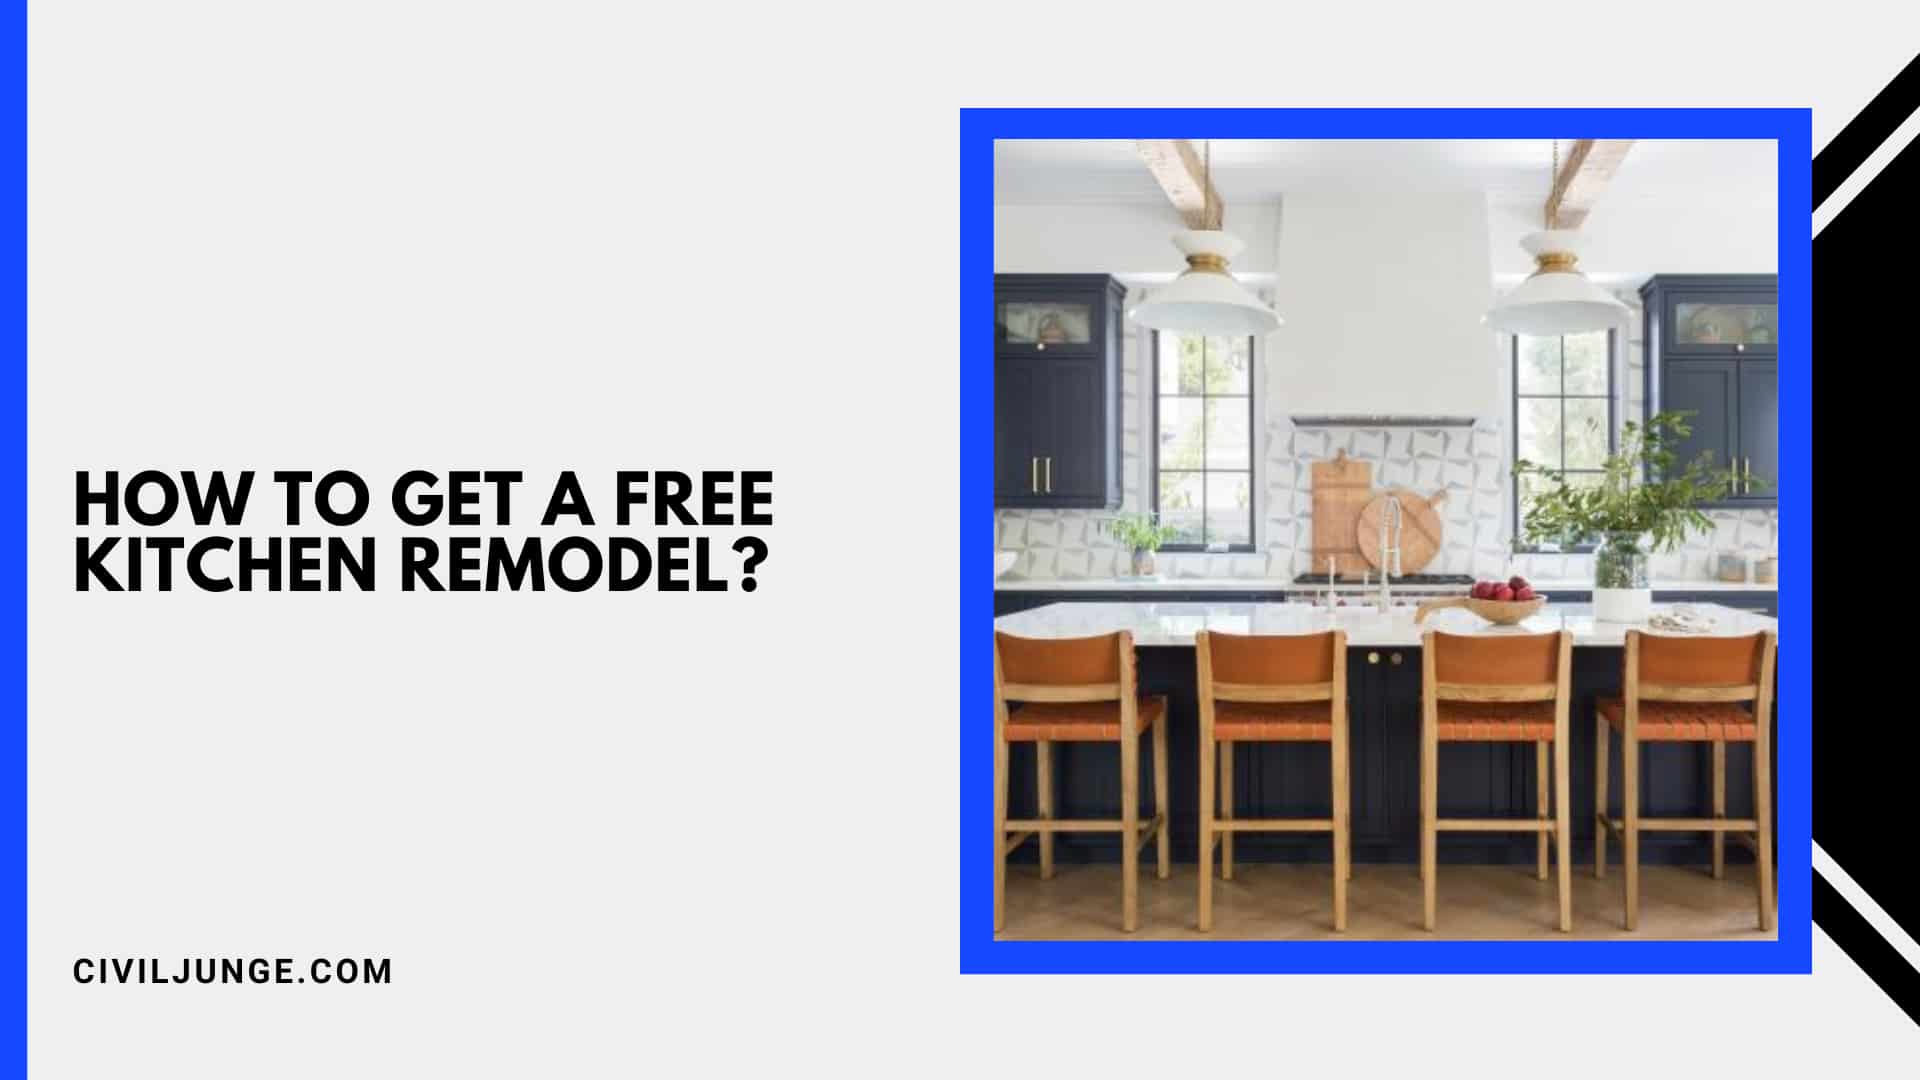 How to Get a Free Kitchen Remodel?